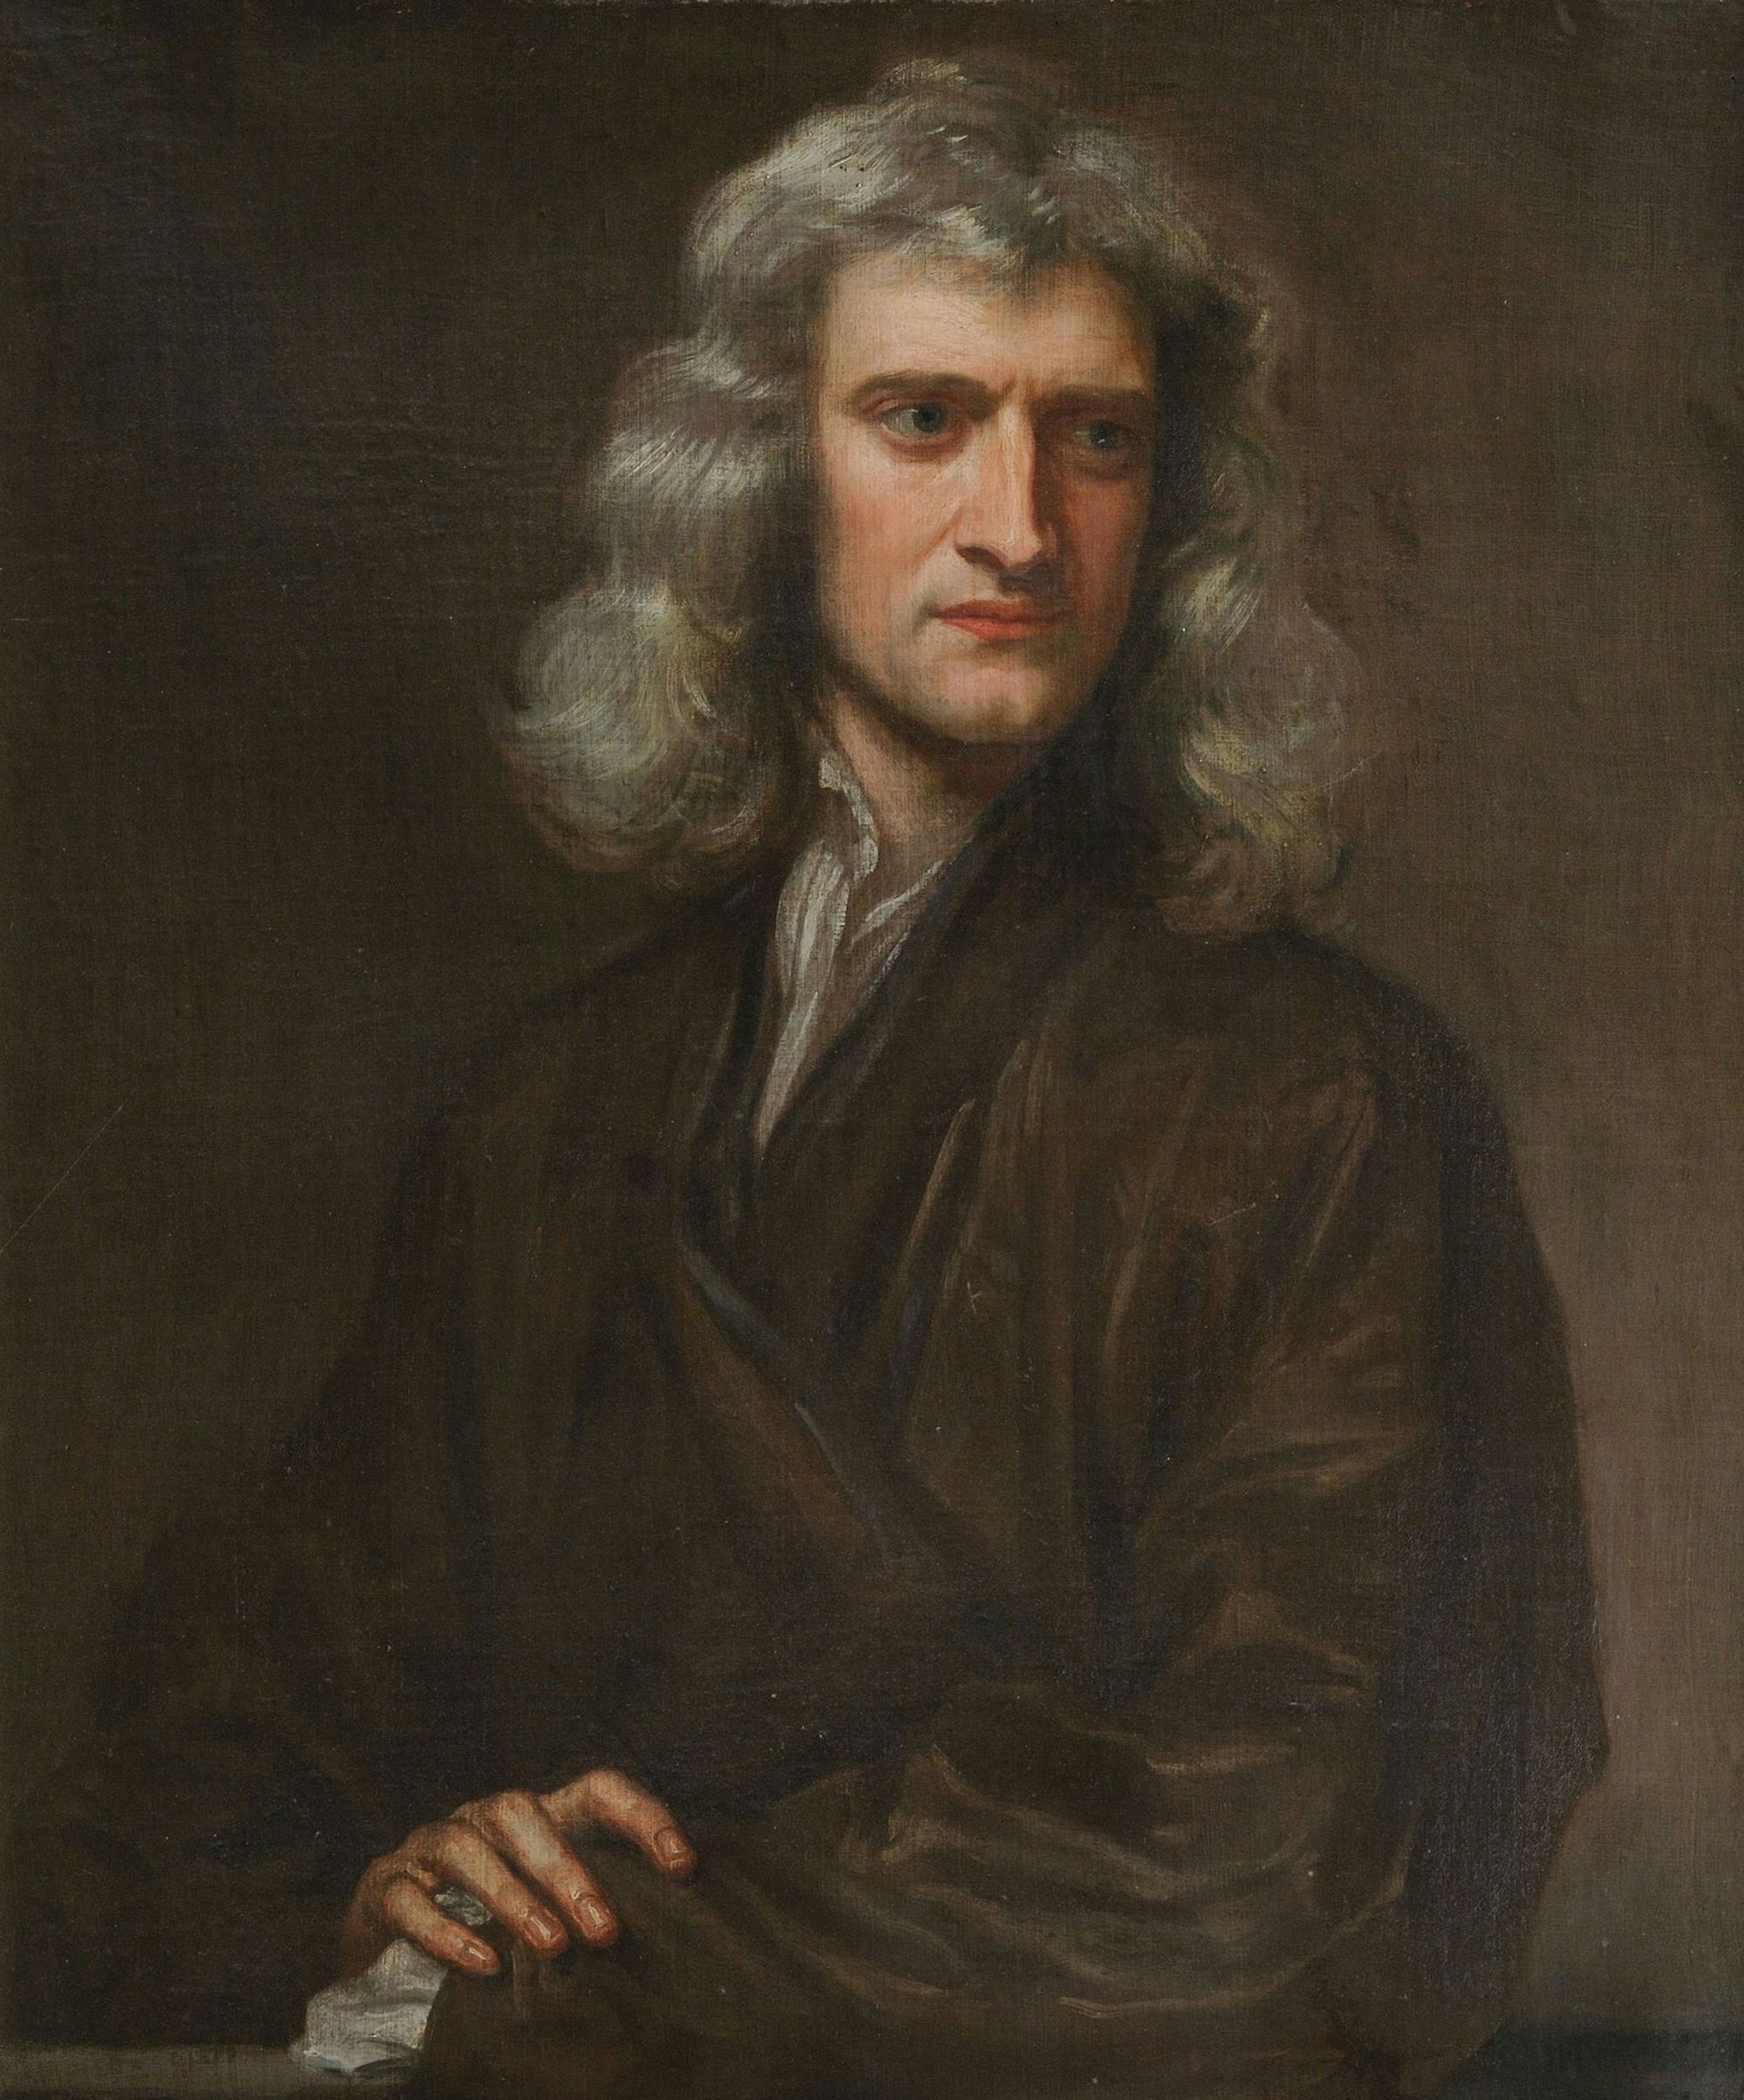 A regal portrait of a man with shoulder-length gray hair, glaring towards his right side.